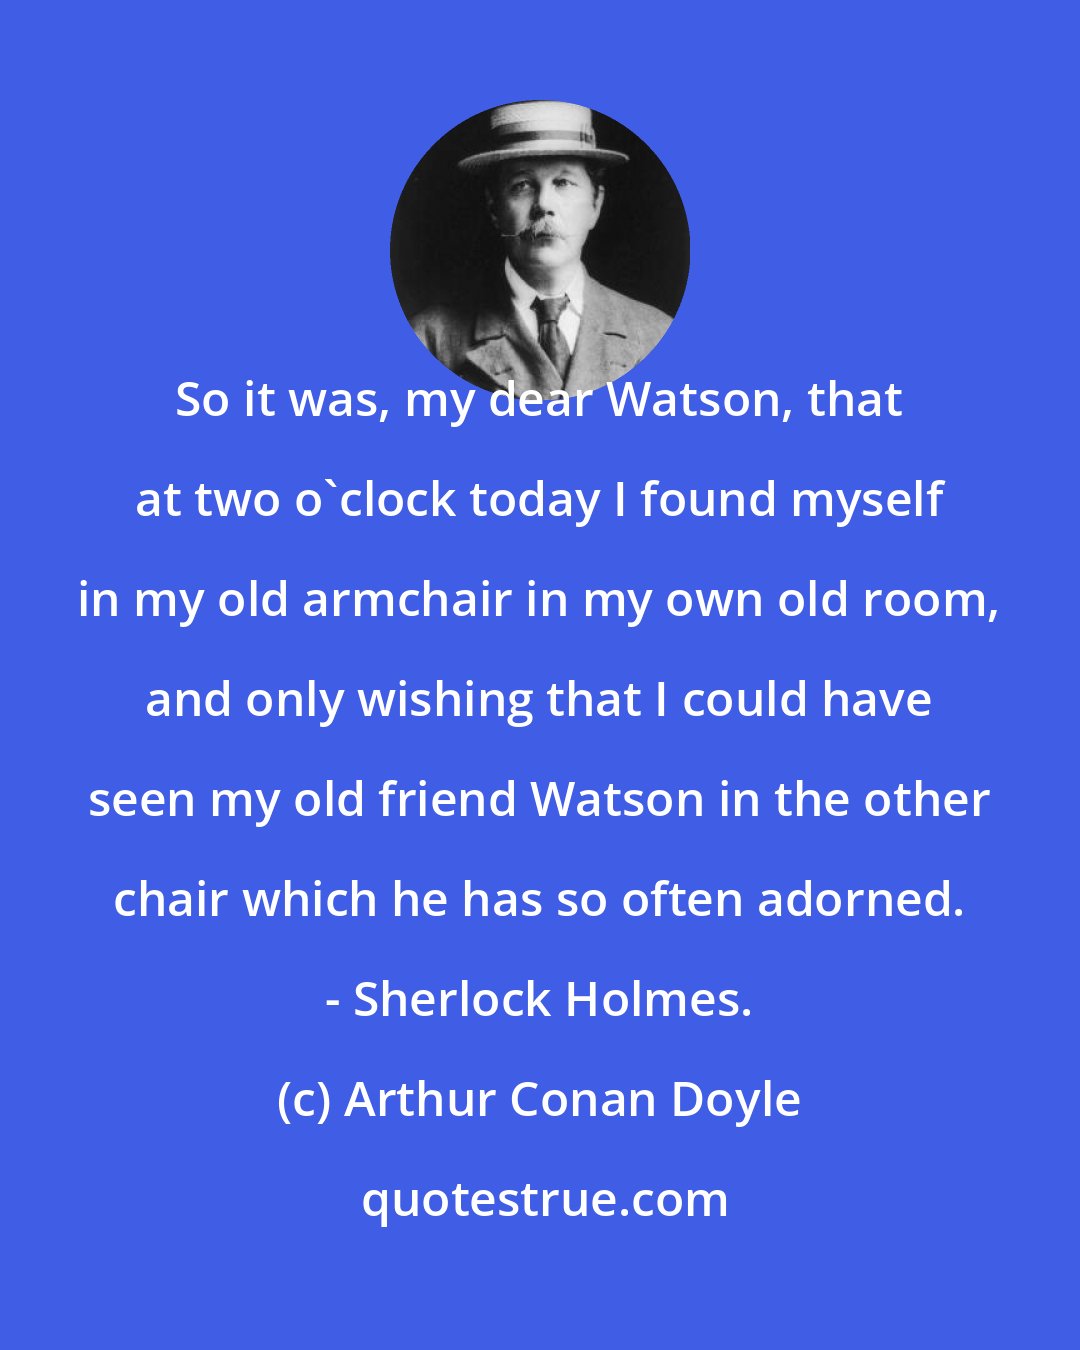 Arthur Conan Doyle: So it was, my dear Watson, that at two o'clock today I found myself in my old armchair in my own old room, and only wishing that I could have seen my old friend Watson in the other chair which he has so often adorned. - Sherlock Holmes.